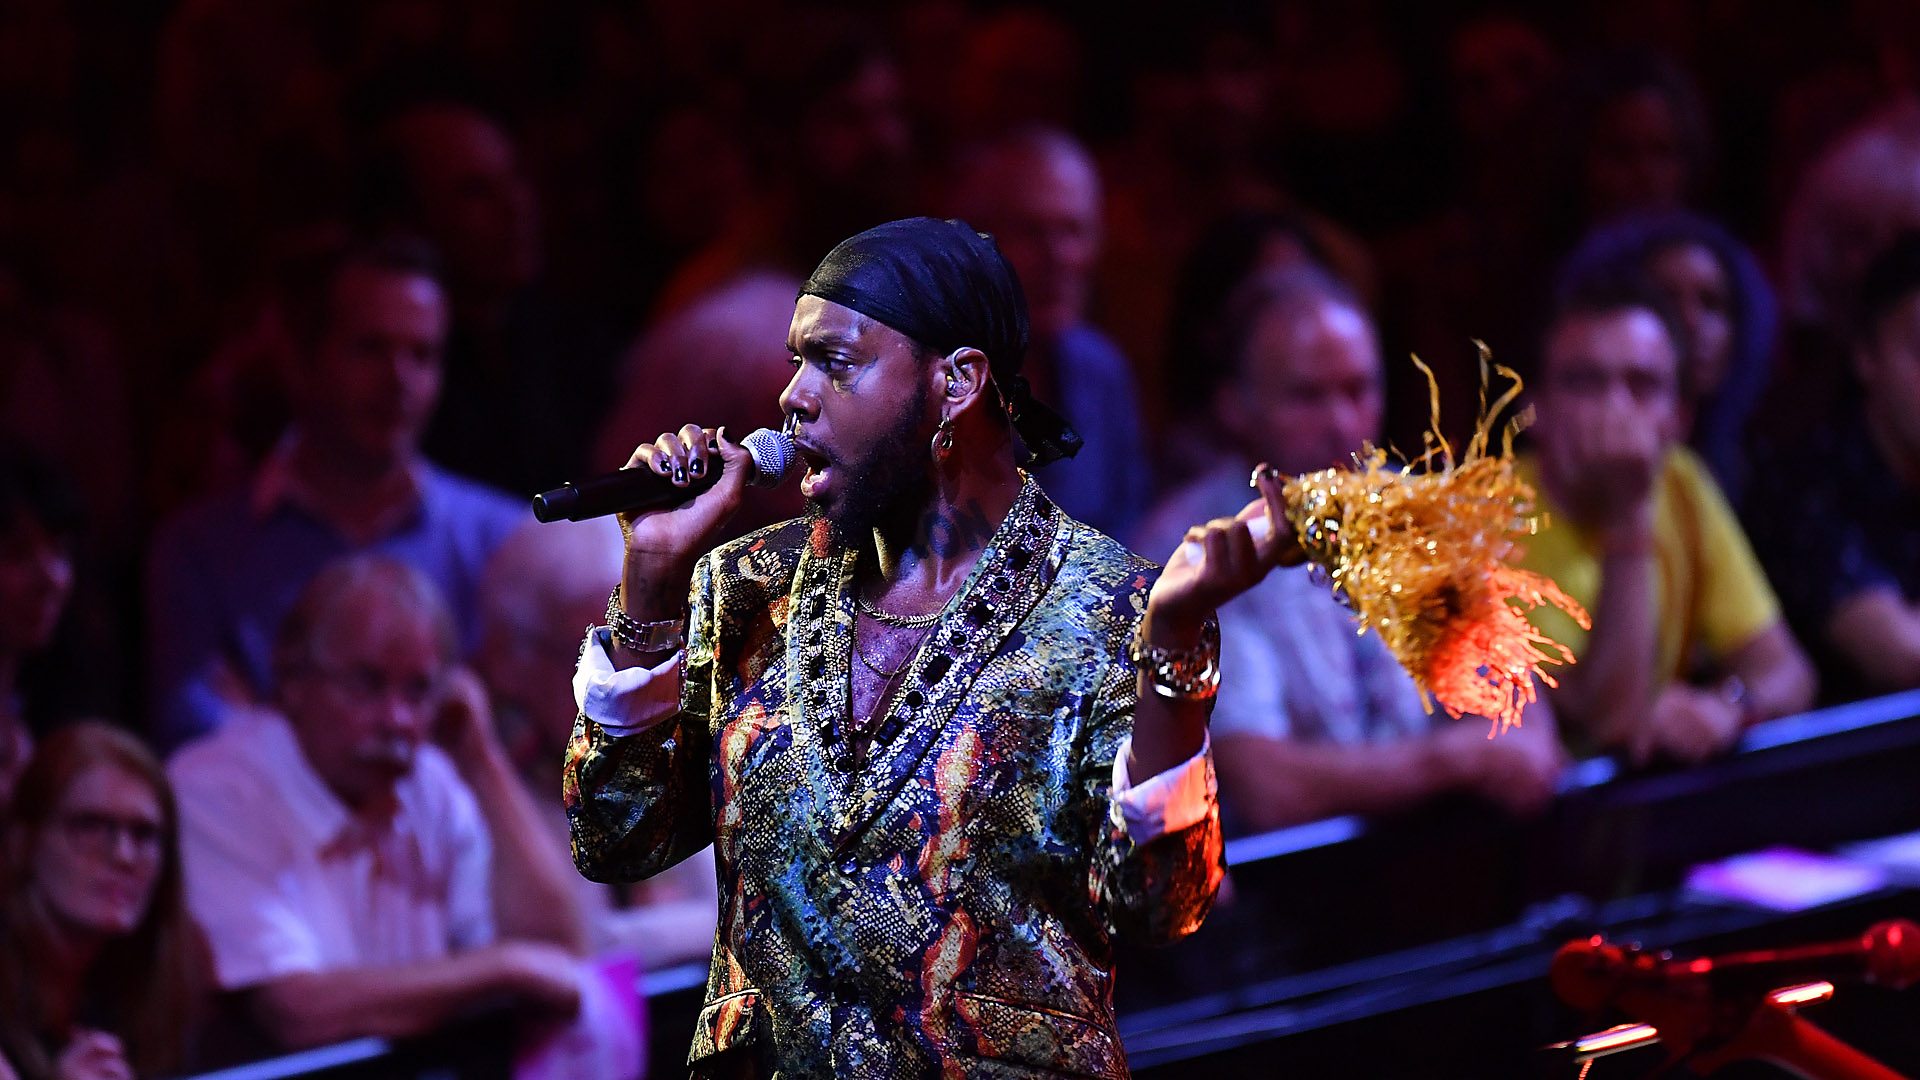 Watch serpentwithfeet & the Heritage Orchestra's hauntingly beautiful performance at BBC Proms